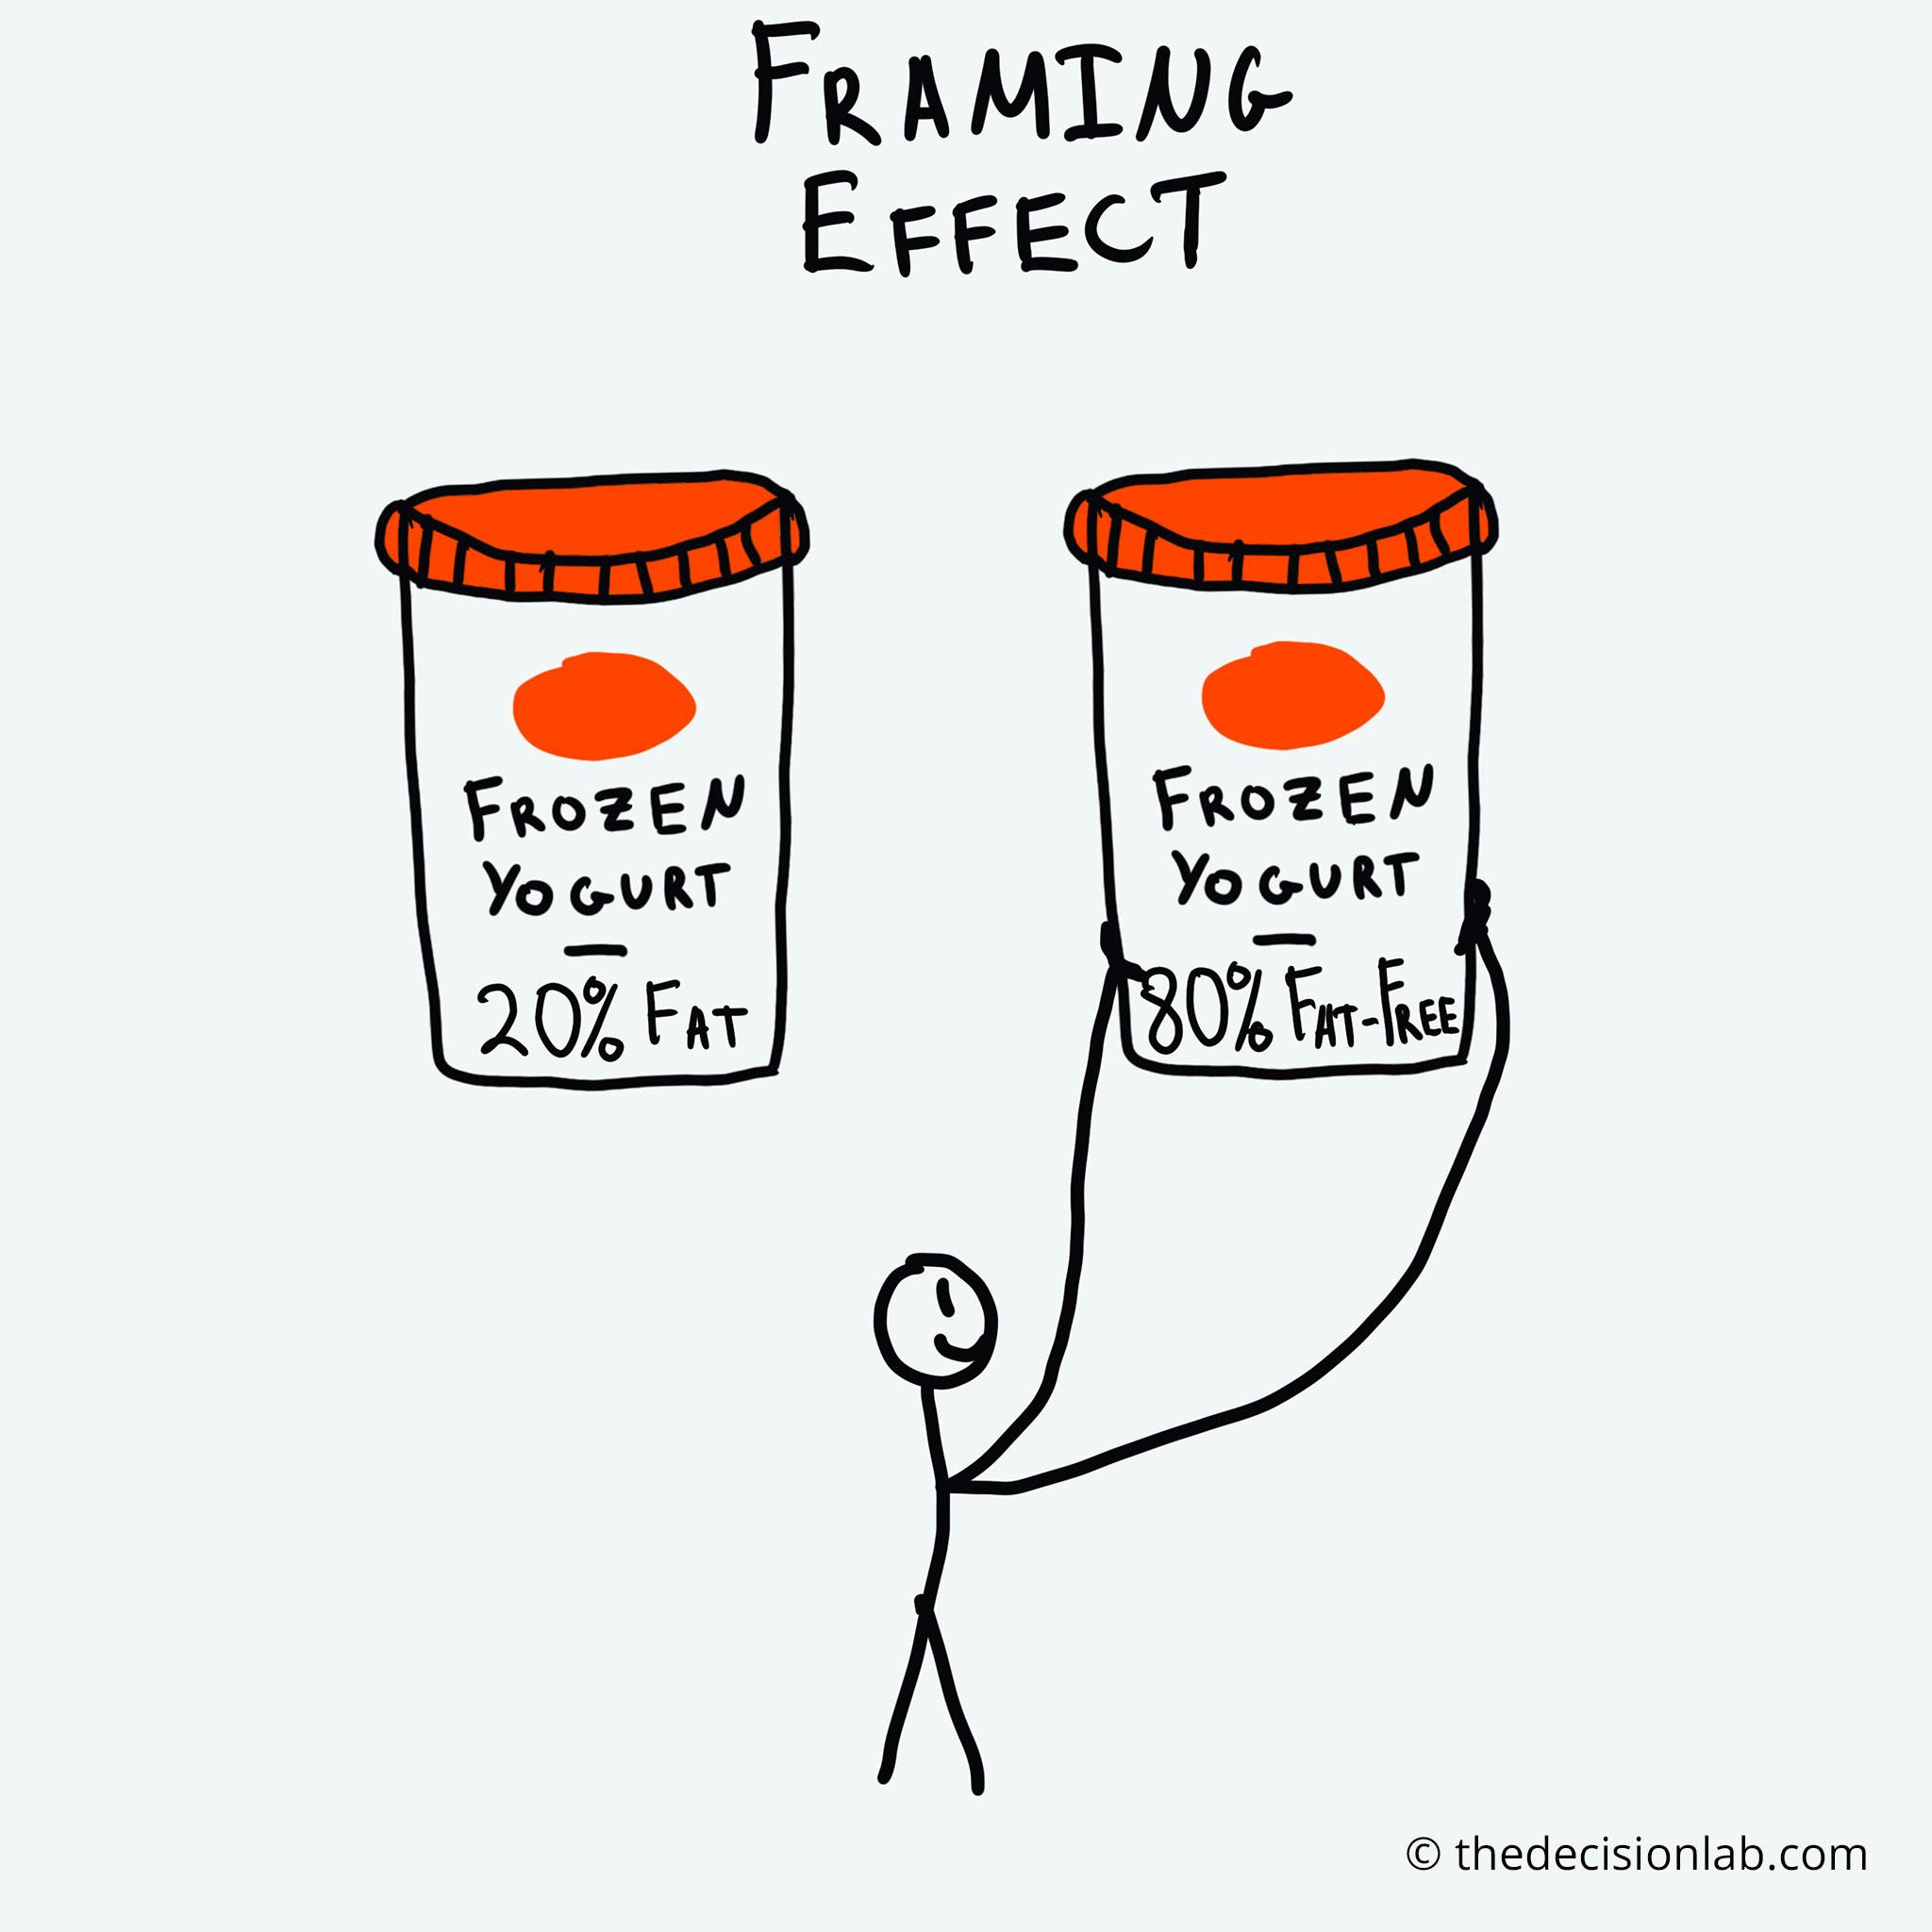 Framing effect - The Decision Lab